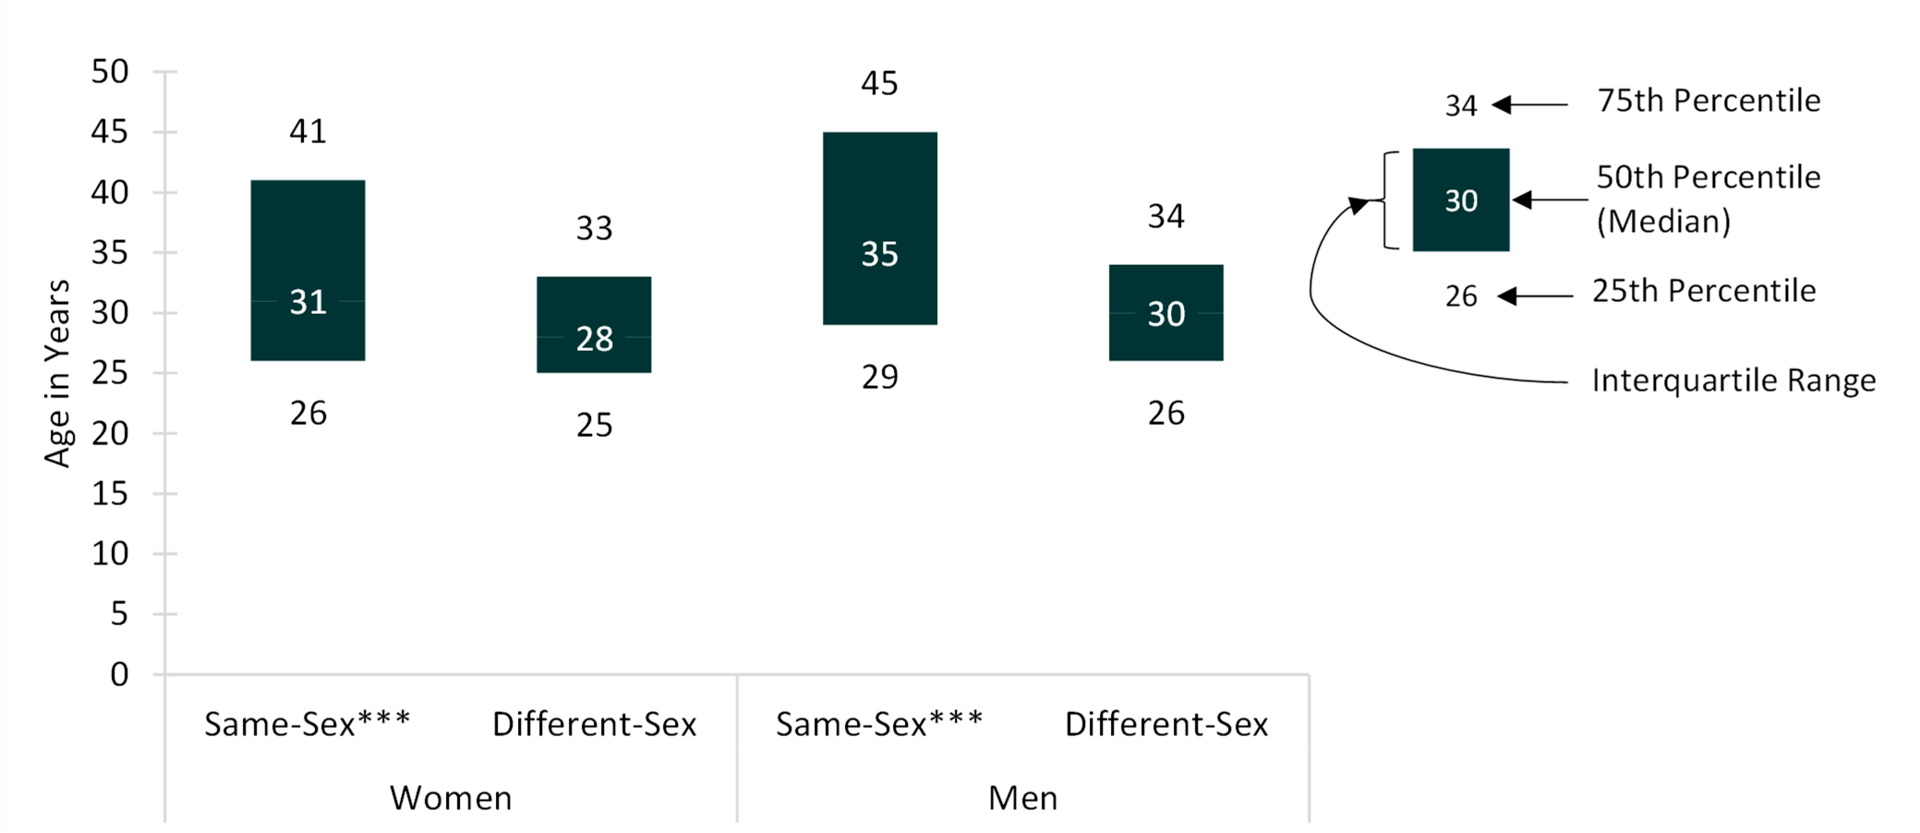 Median Age At First Marriage For Same Sex And Different Sex Couples 2019